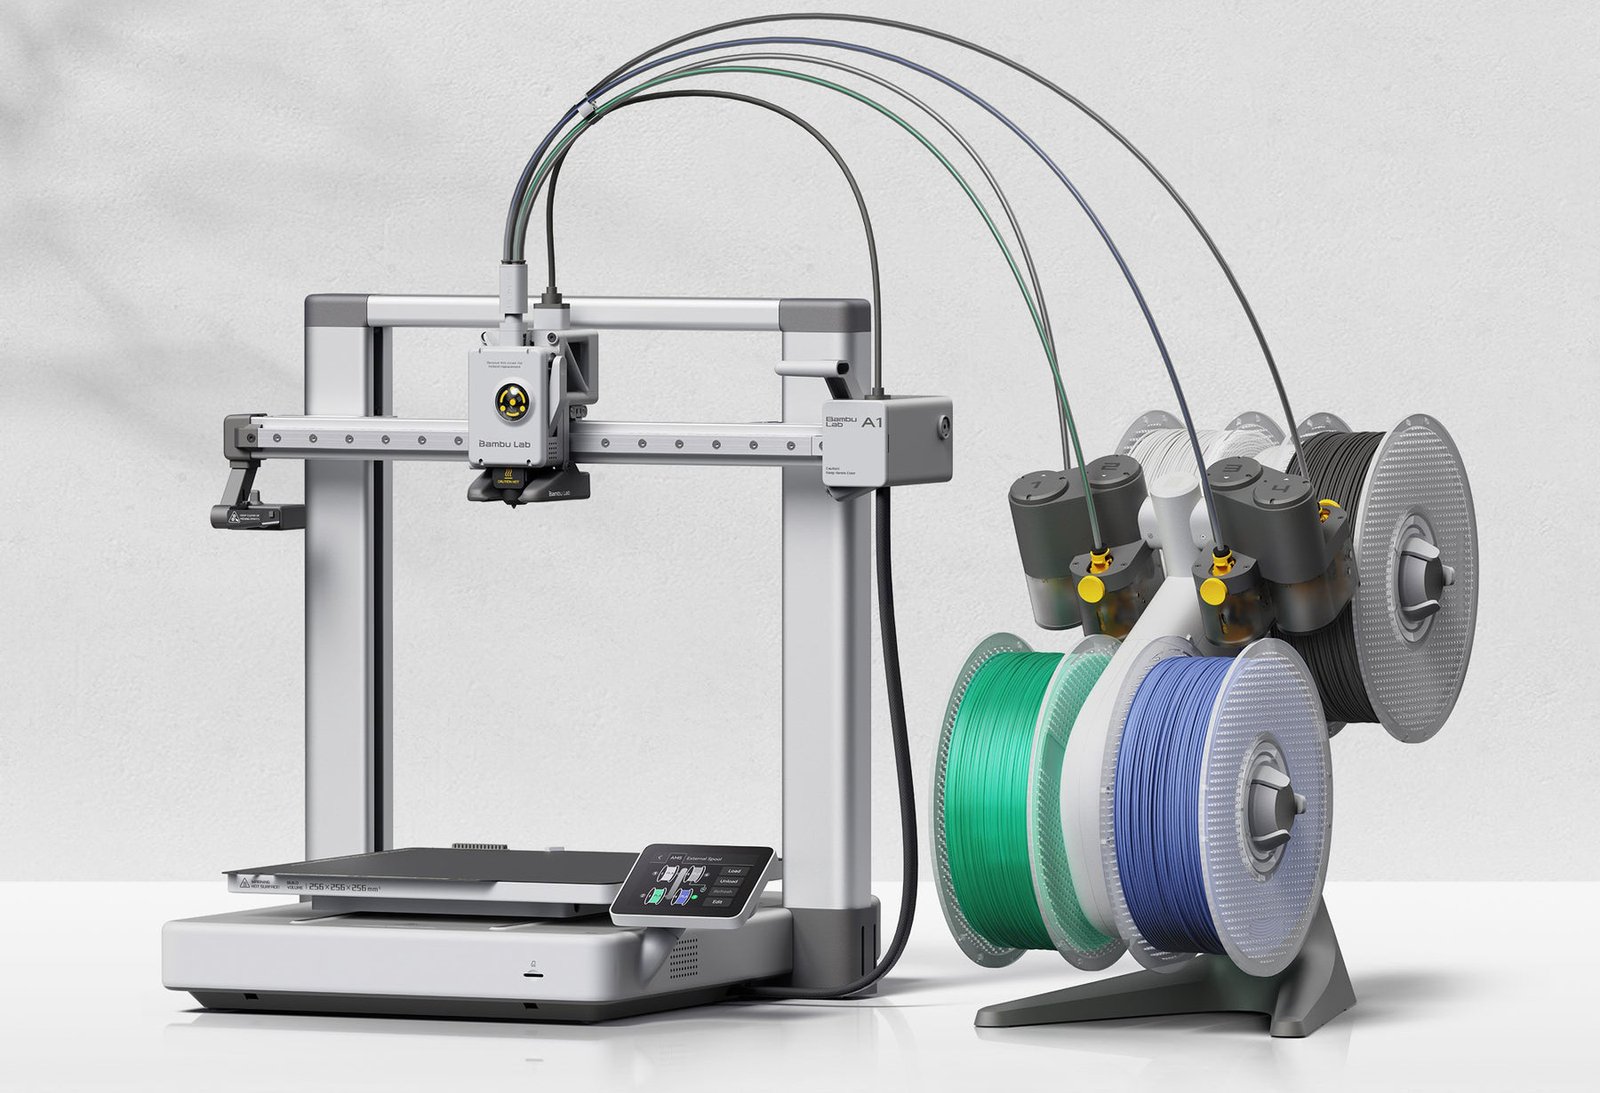 Bambu Lab launches the highly anticipated new A1 3D printer